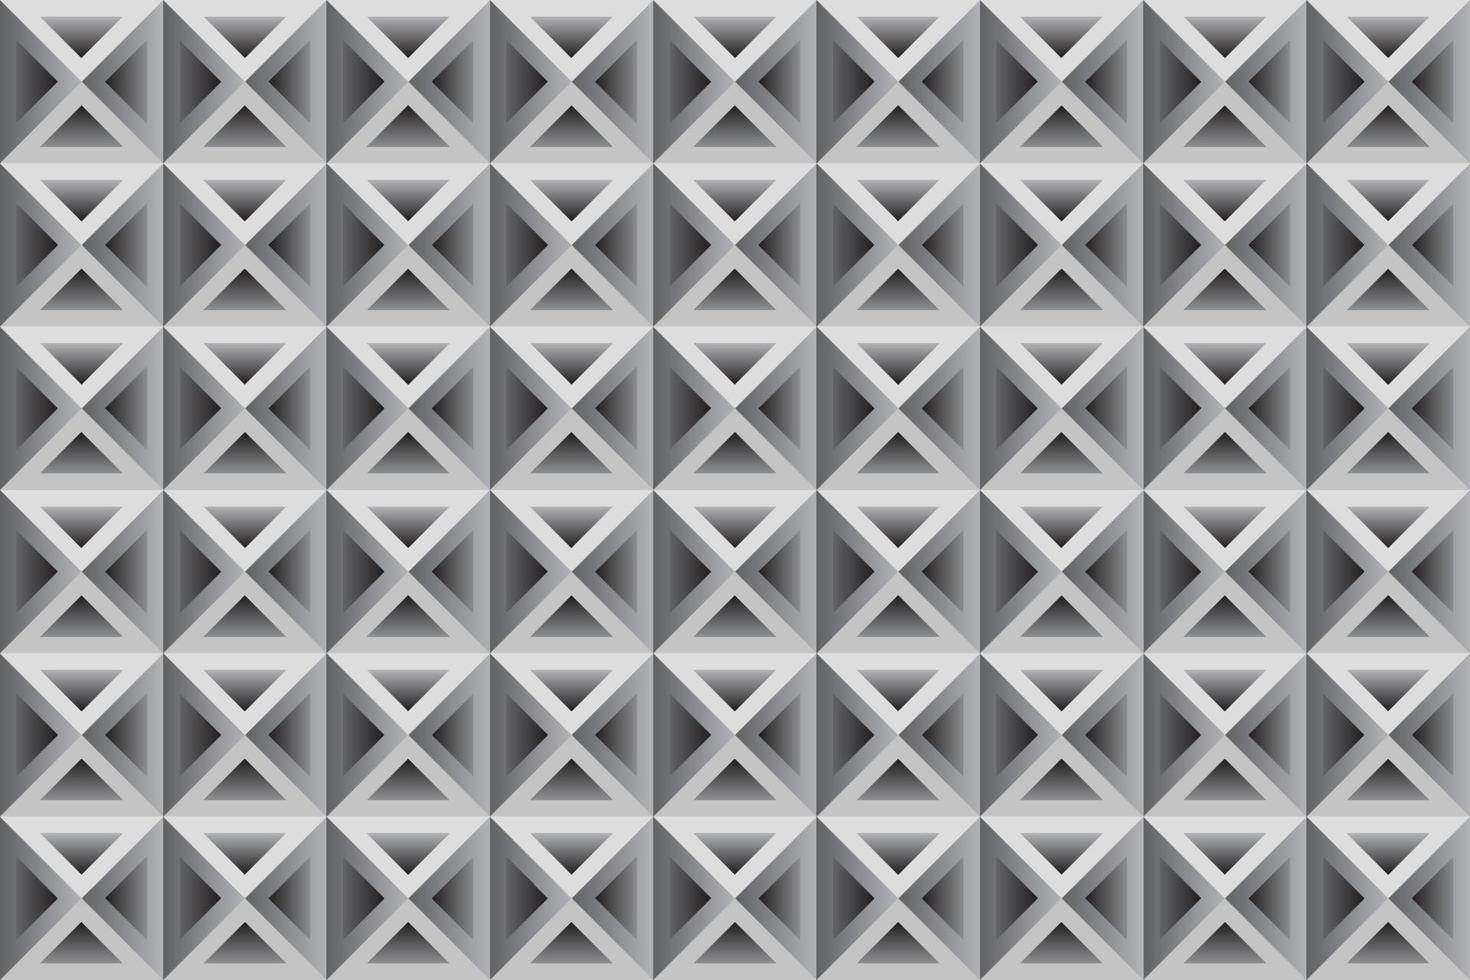 Monochrome background with repeating geometric shapes. Abstract mosaic background with squares and triangles. vector